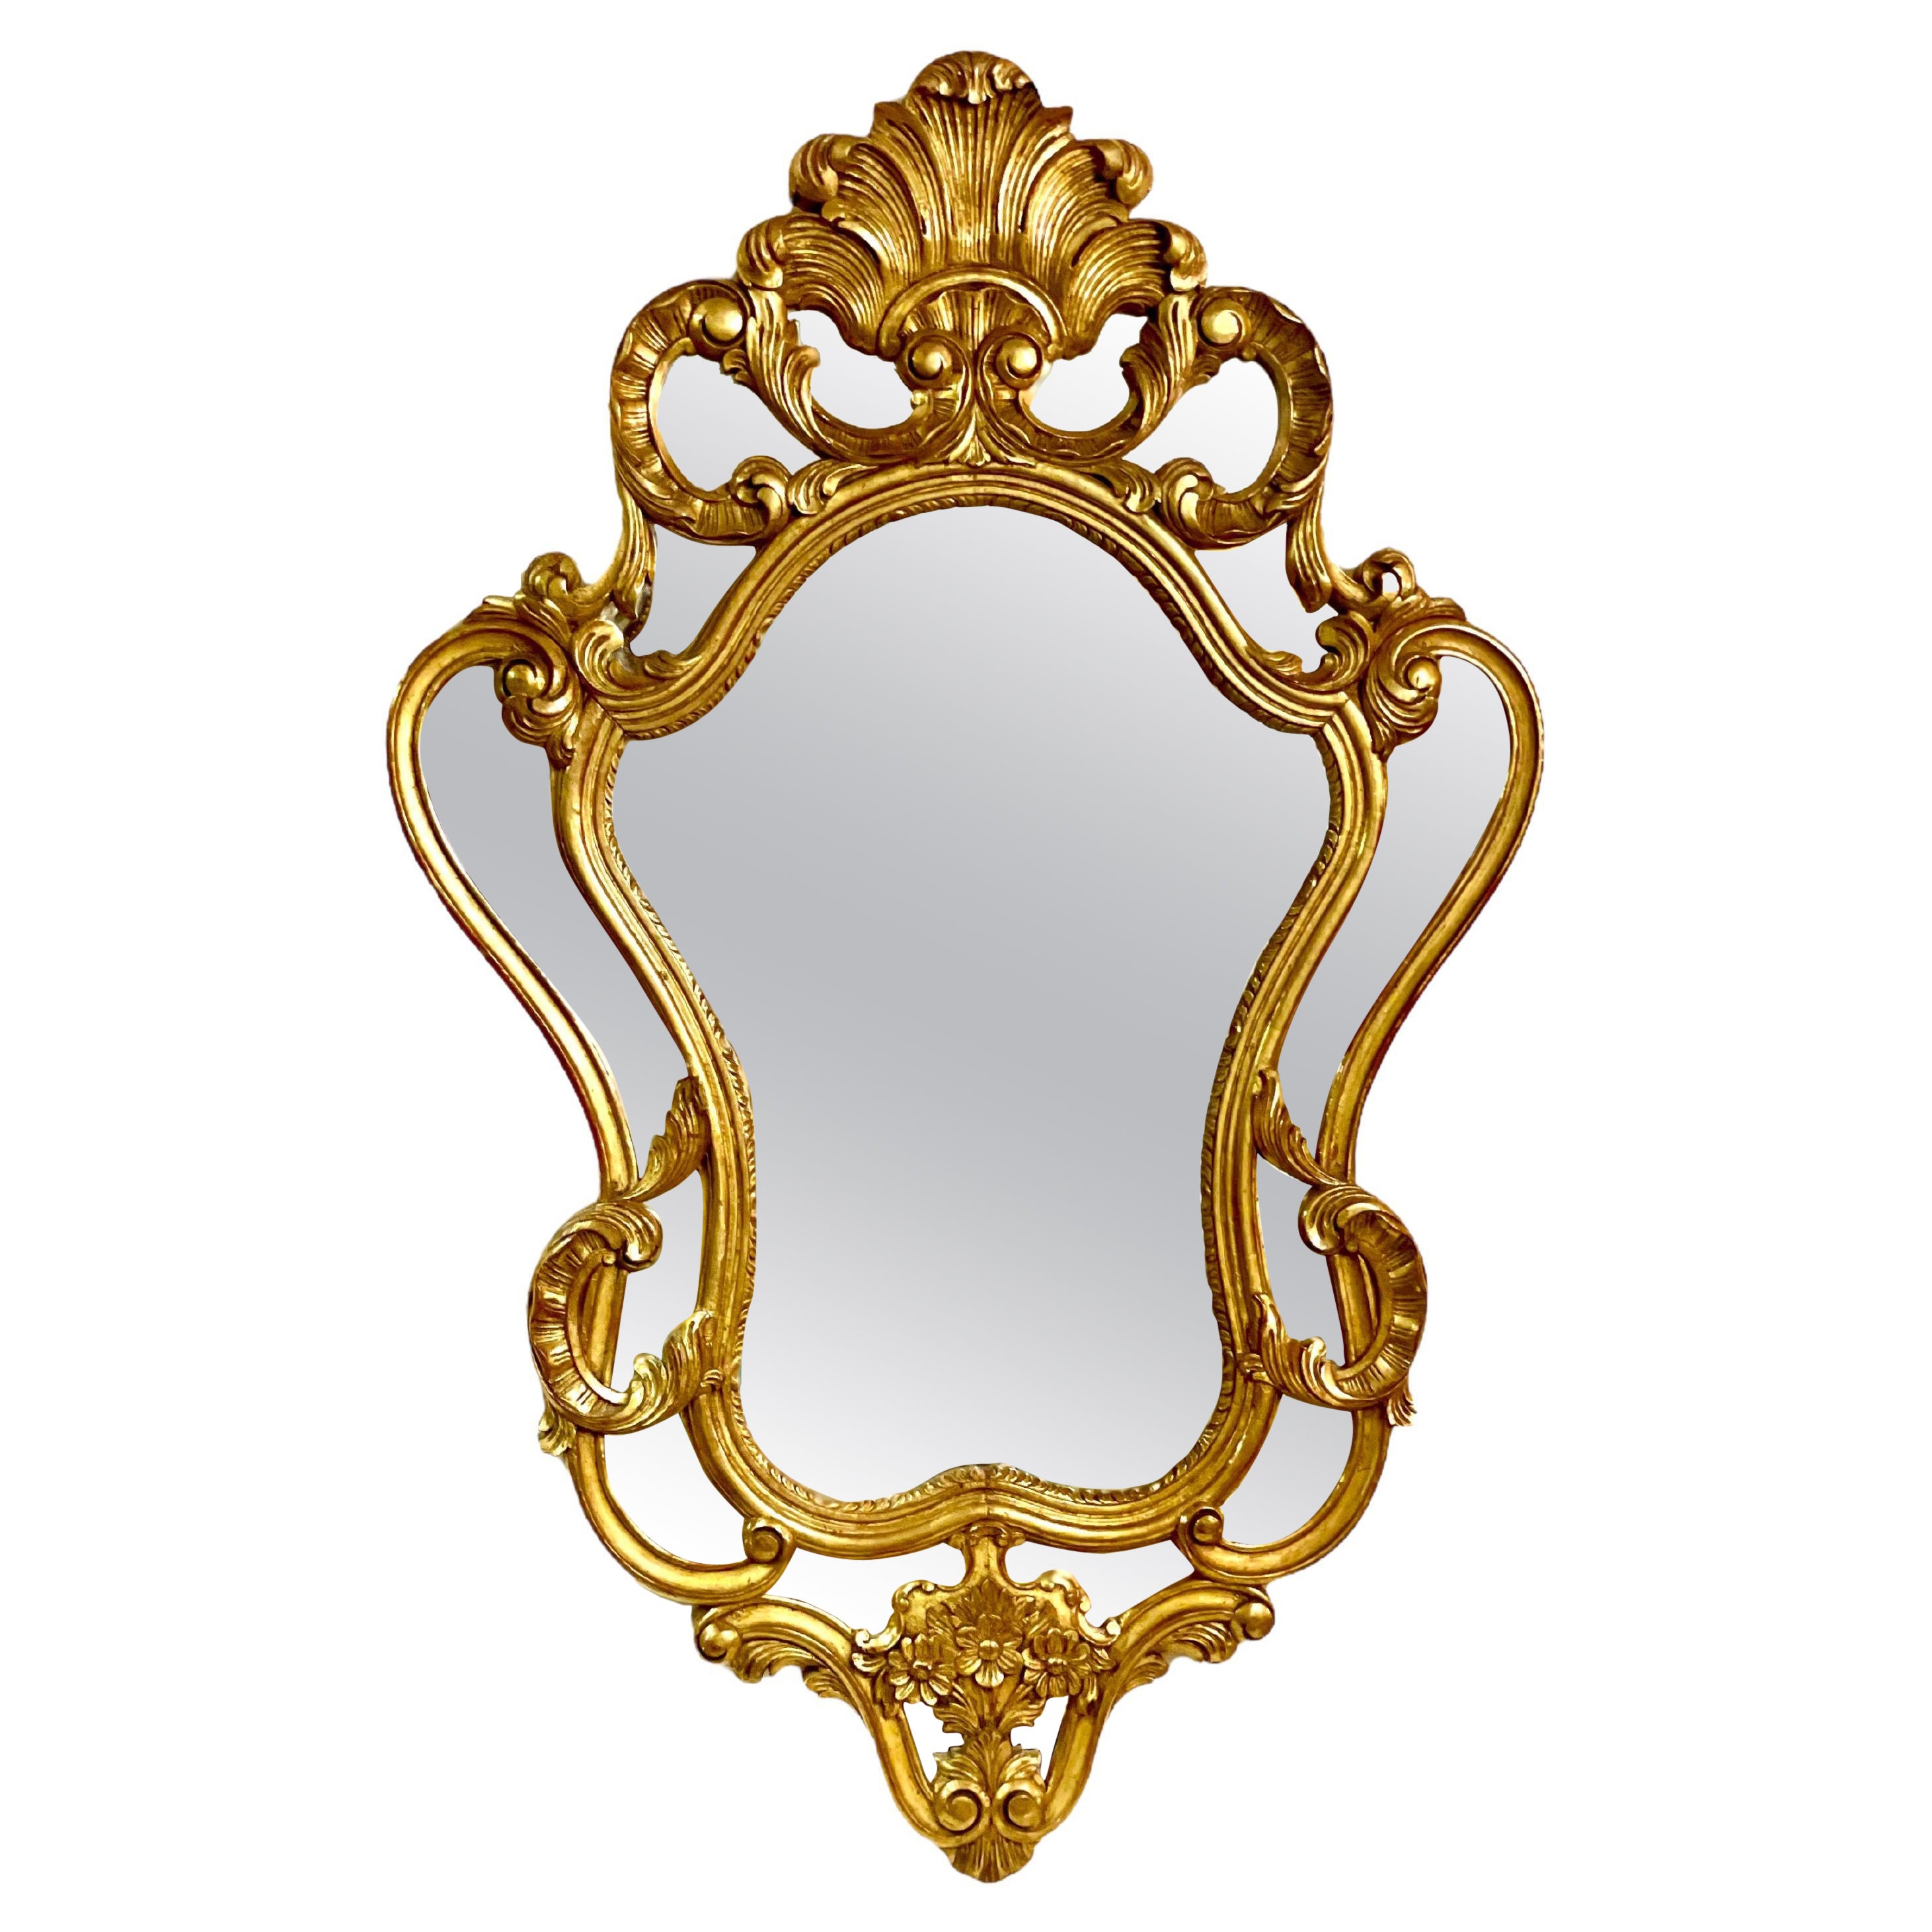 French Large Rococo Style Gilt Wall Mirror with Parecloses For Sale